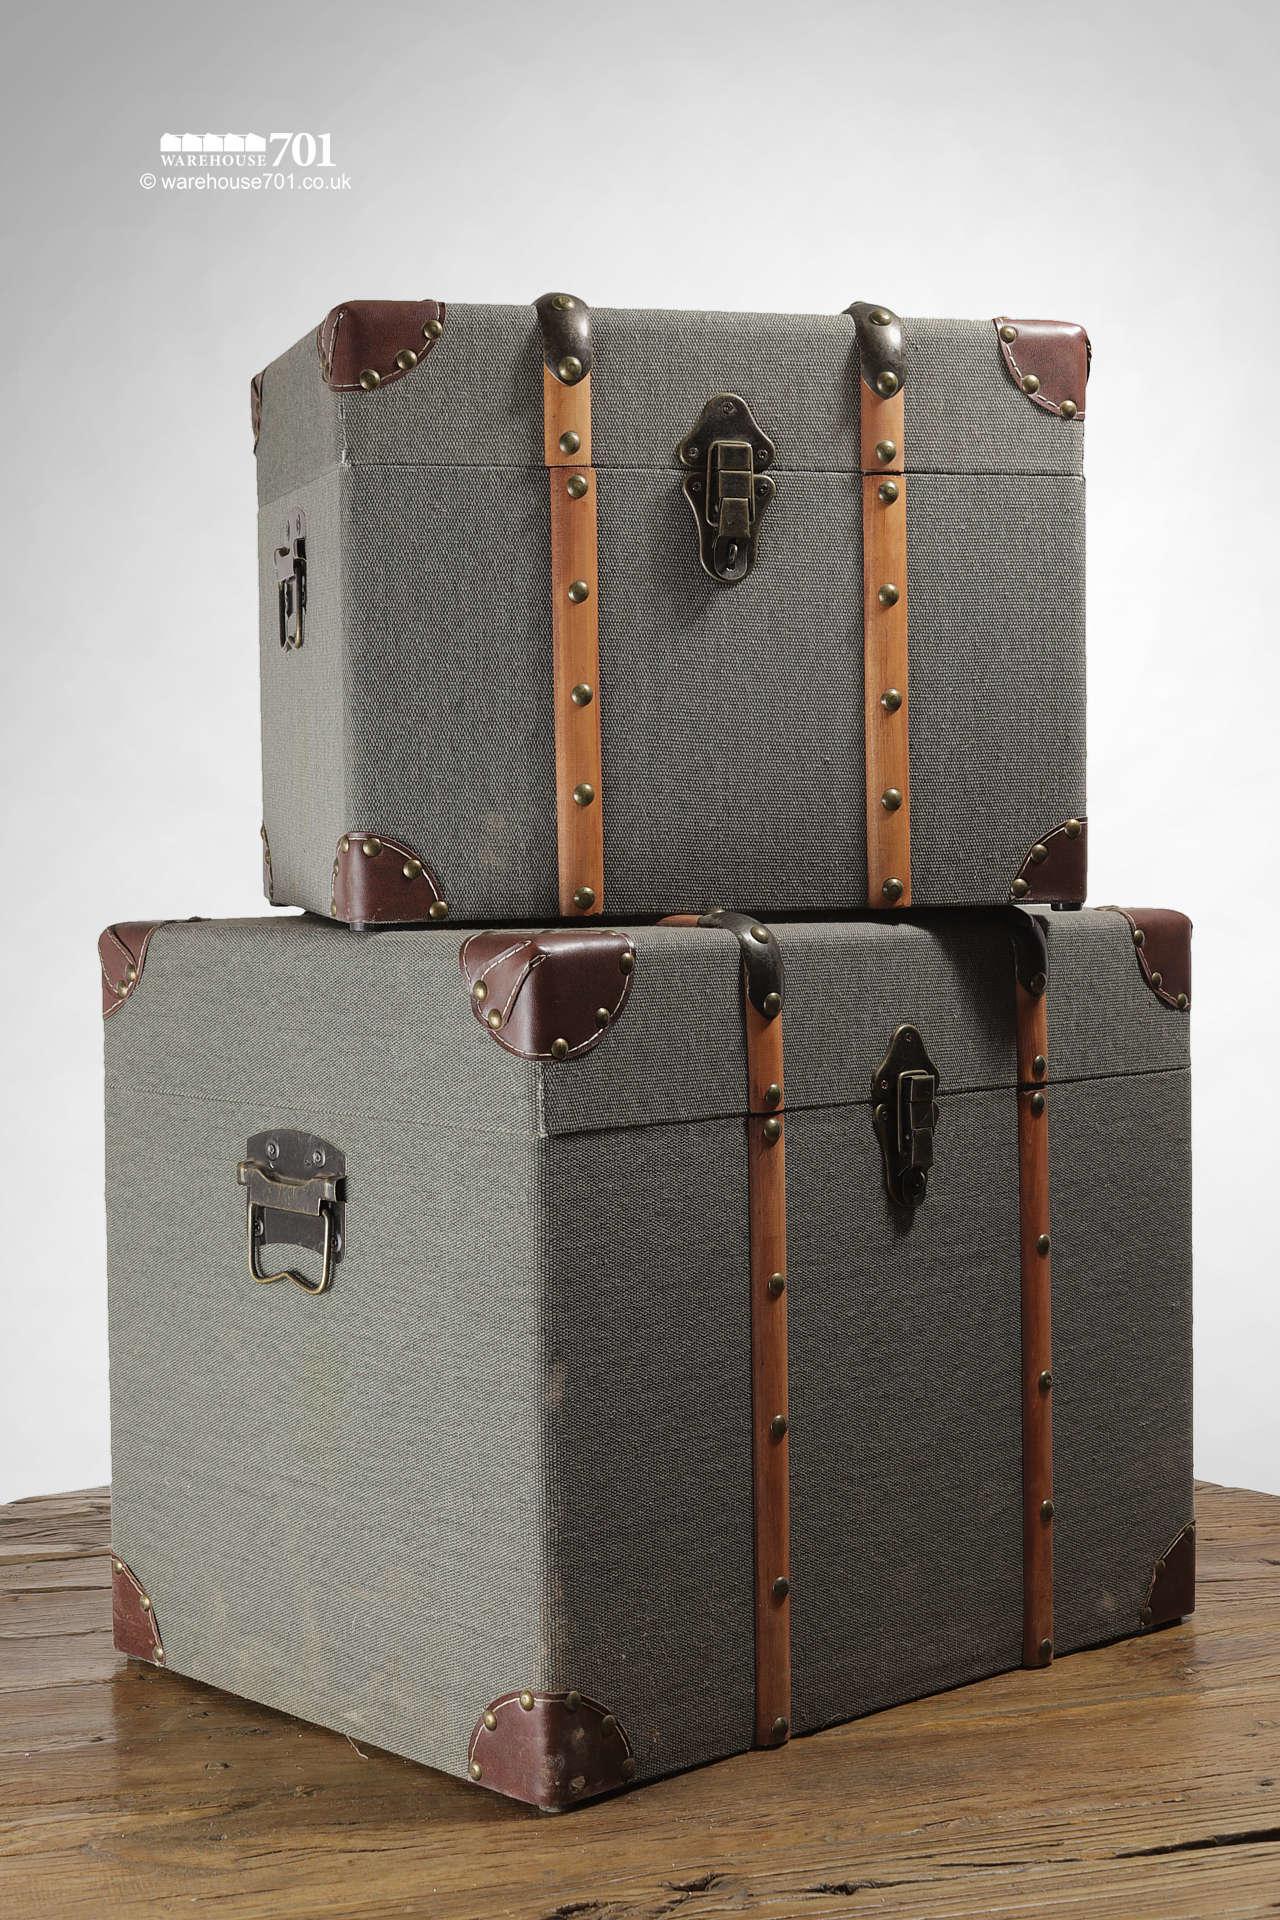 NEW Khaki Fabric Covered Storage Trunks with Leather and Wood Detailing #2